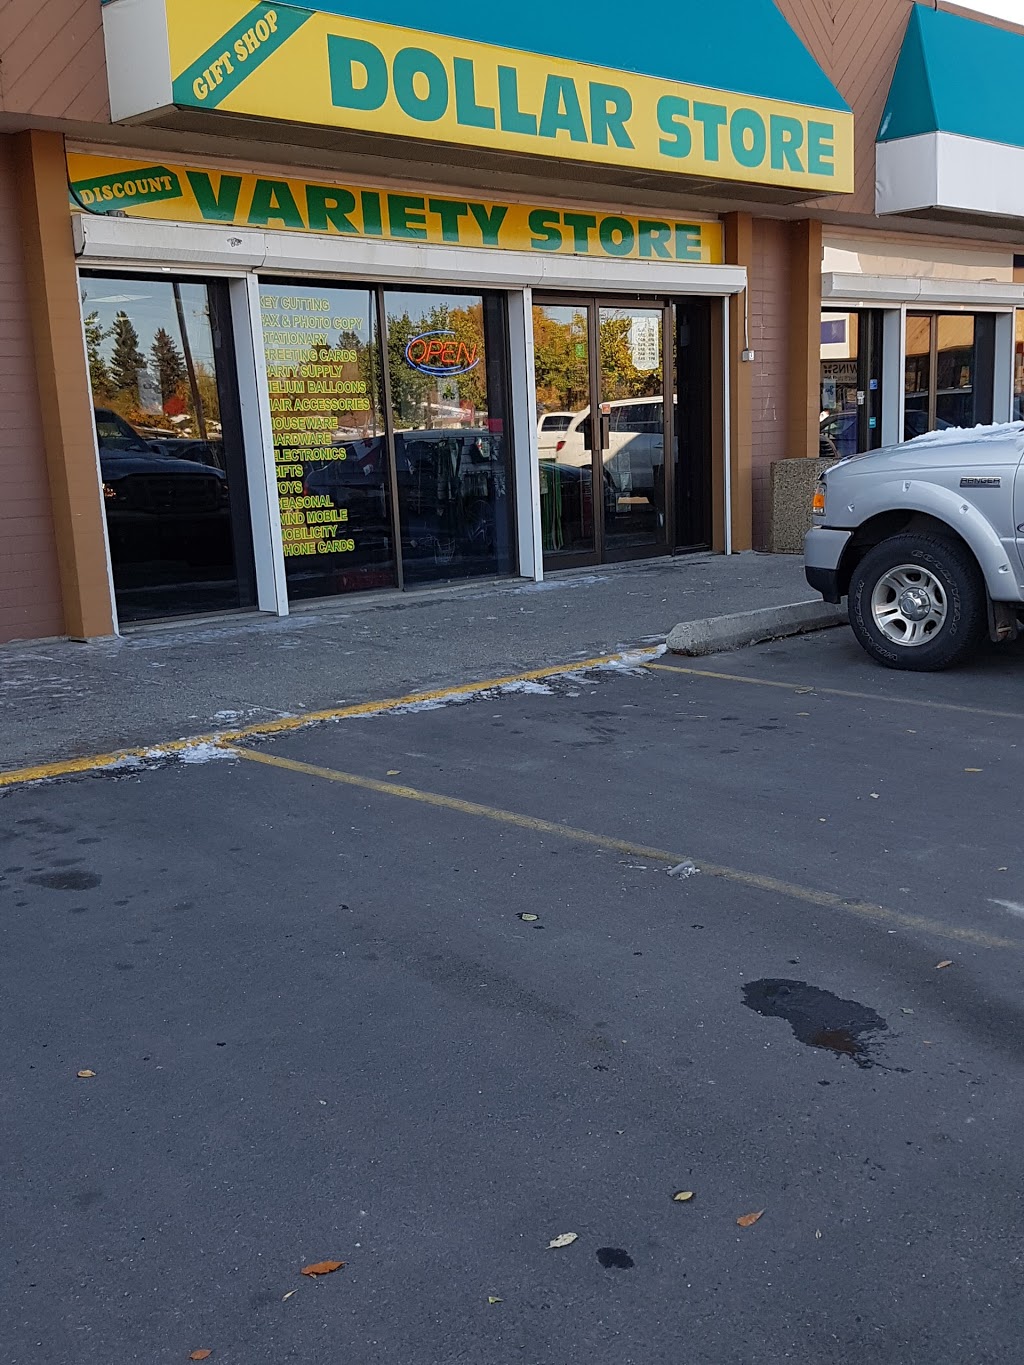 Dollar Store | store | 3525 26 Ave SE, Calgary, AB T2B 3M9, Canada | 4032931142 OR +1 403-293-1142